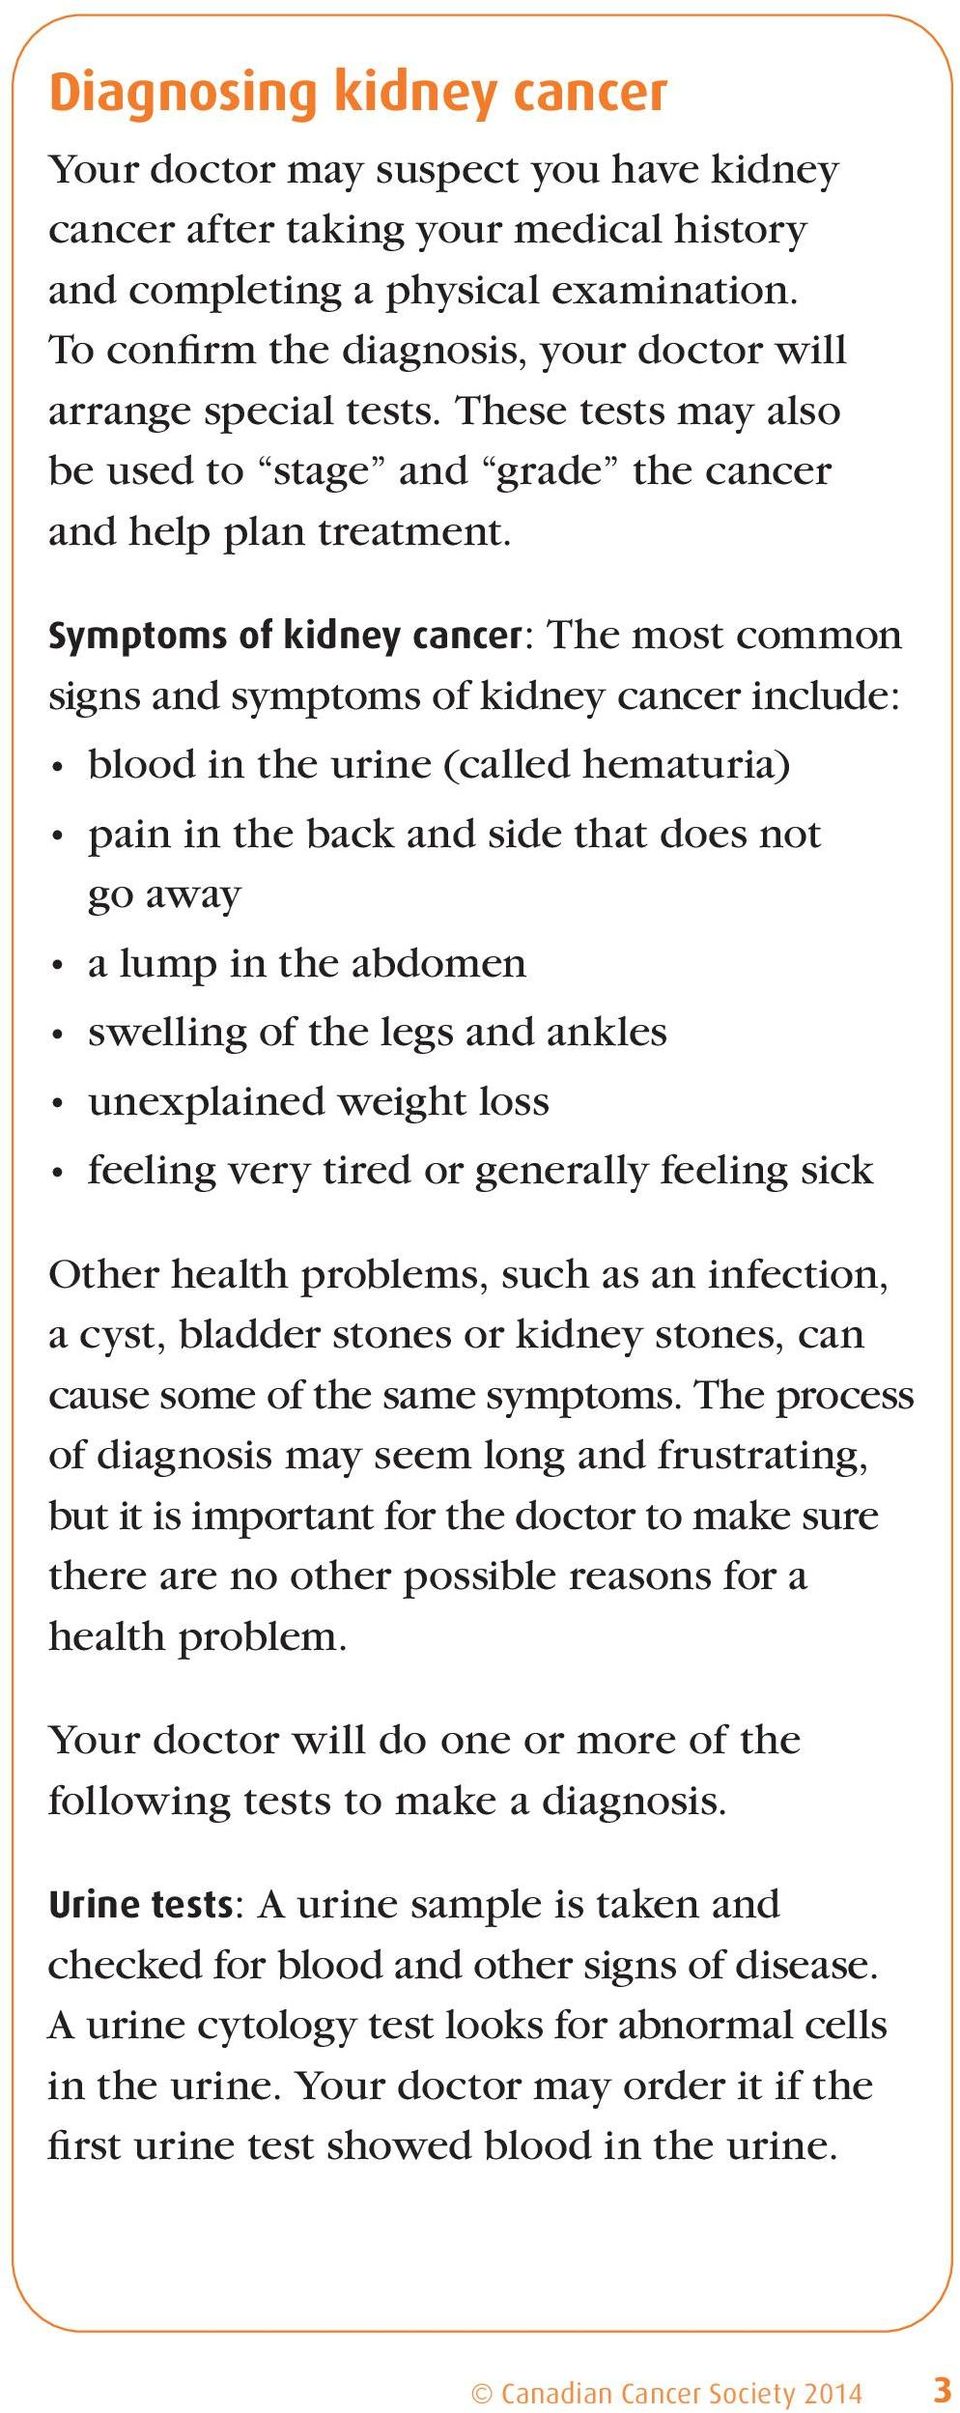 Symptoms of kidney cancer: The most common signs and symptoms of kidney cancer include: blood in the urine (called hematuria) pain in the back and side that does not go away a lump in the abdomen